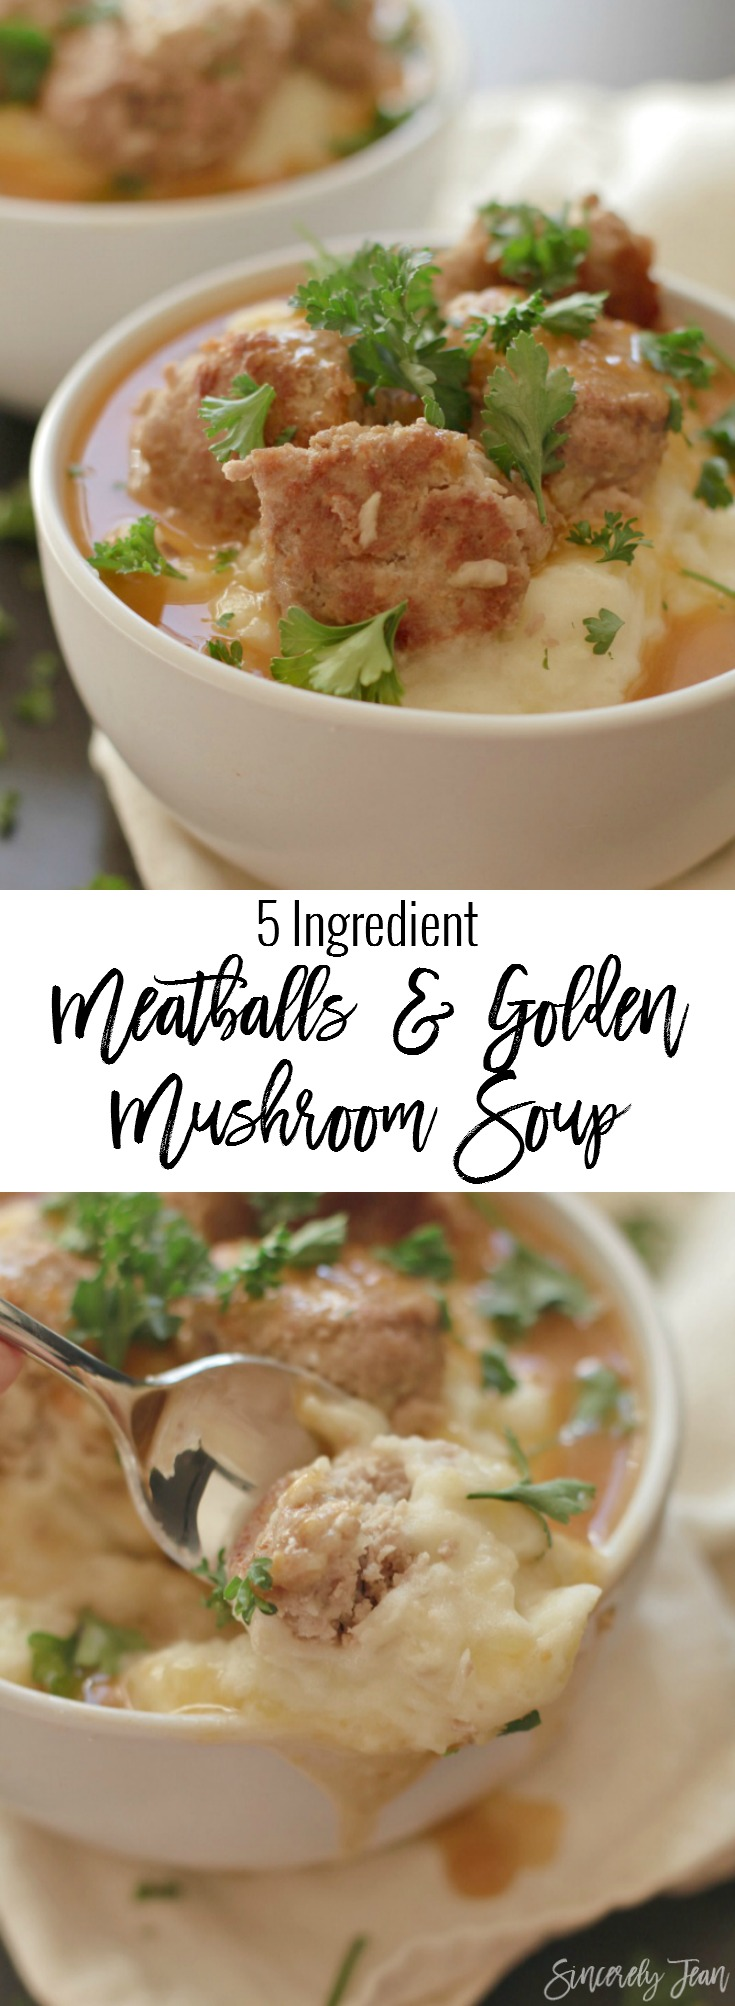 5 Ingredient Meatballs with Golden Mushroom Soup - The perfect quick and easy dinner recipe that your entire family will love! | www.SincerelyJean.com